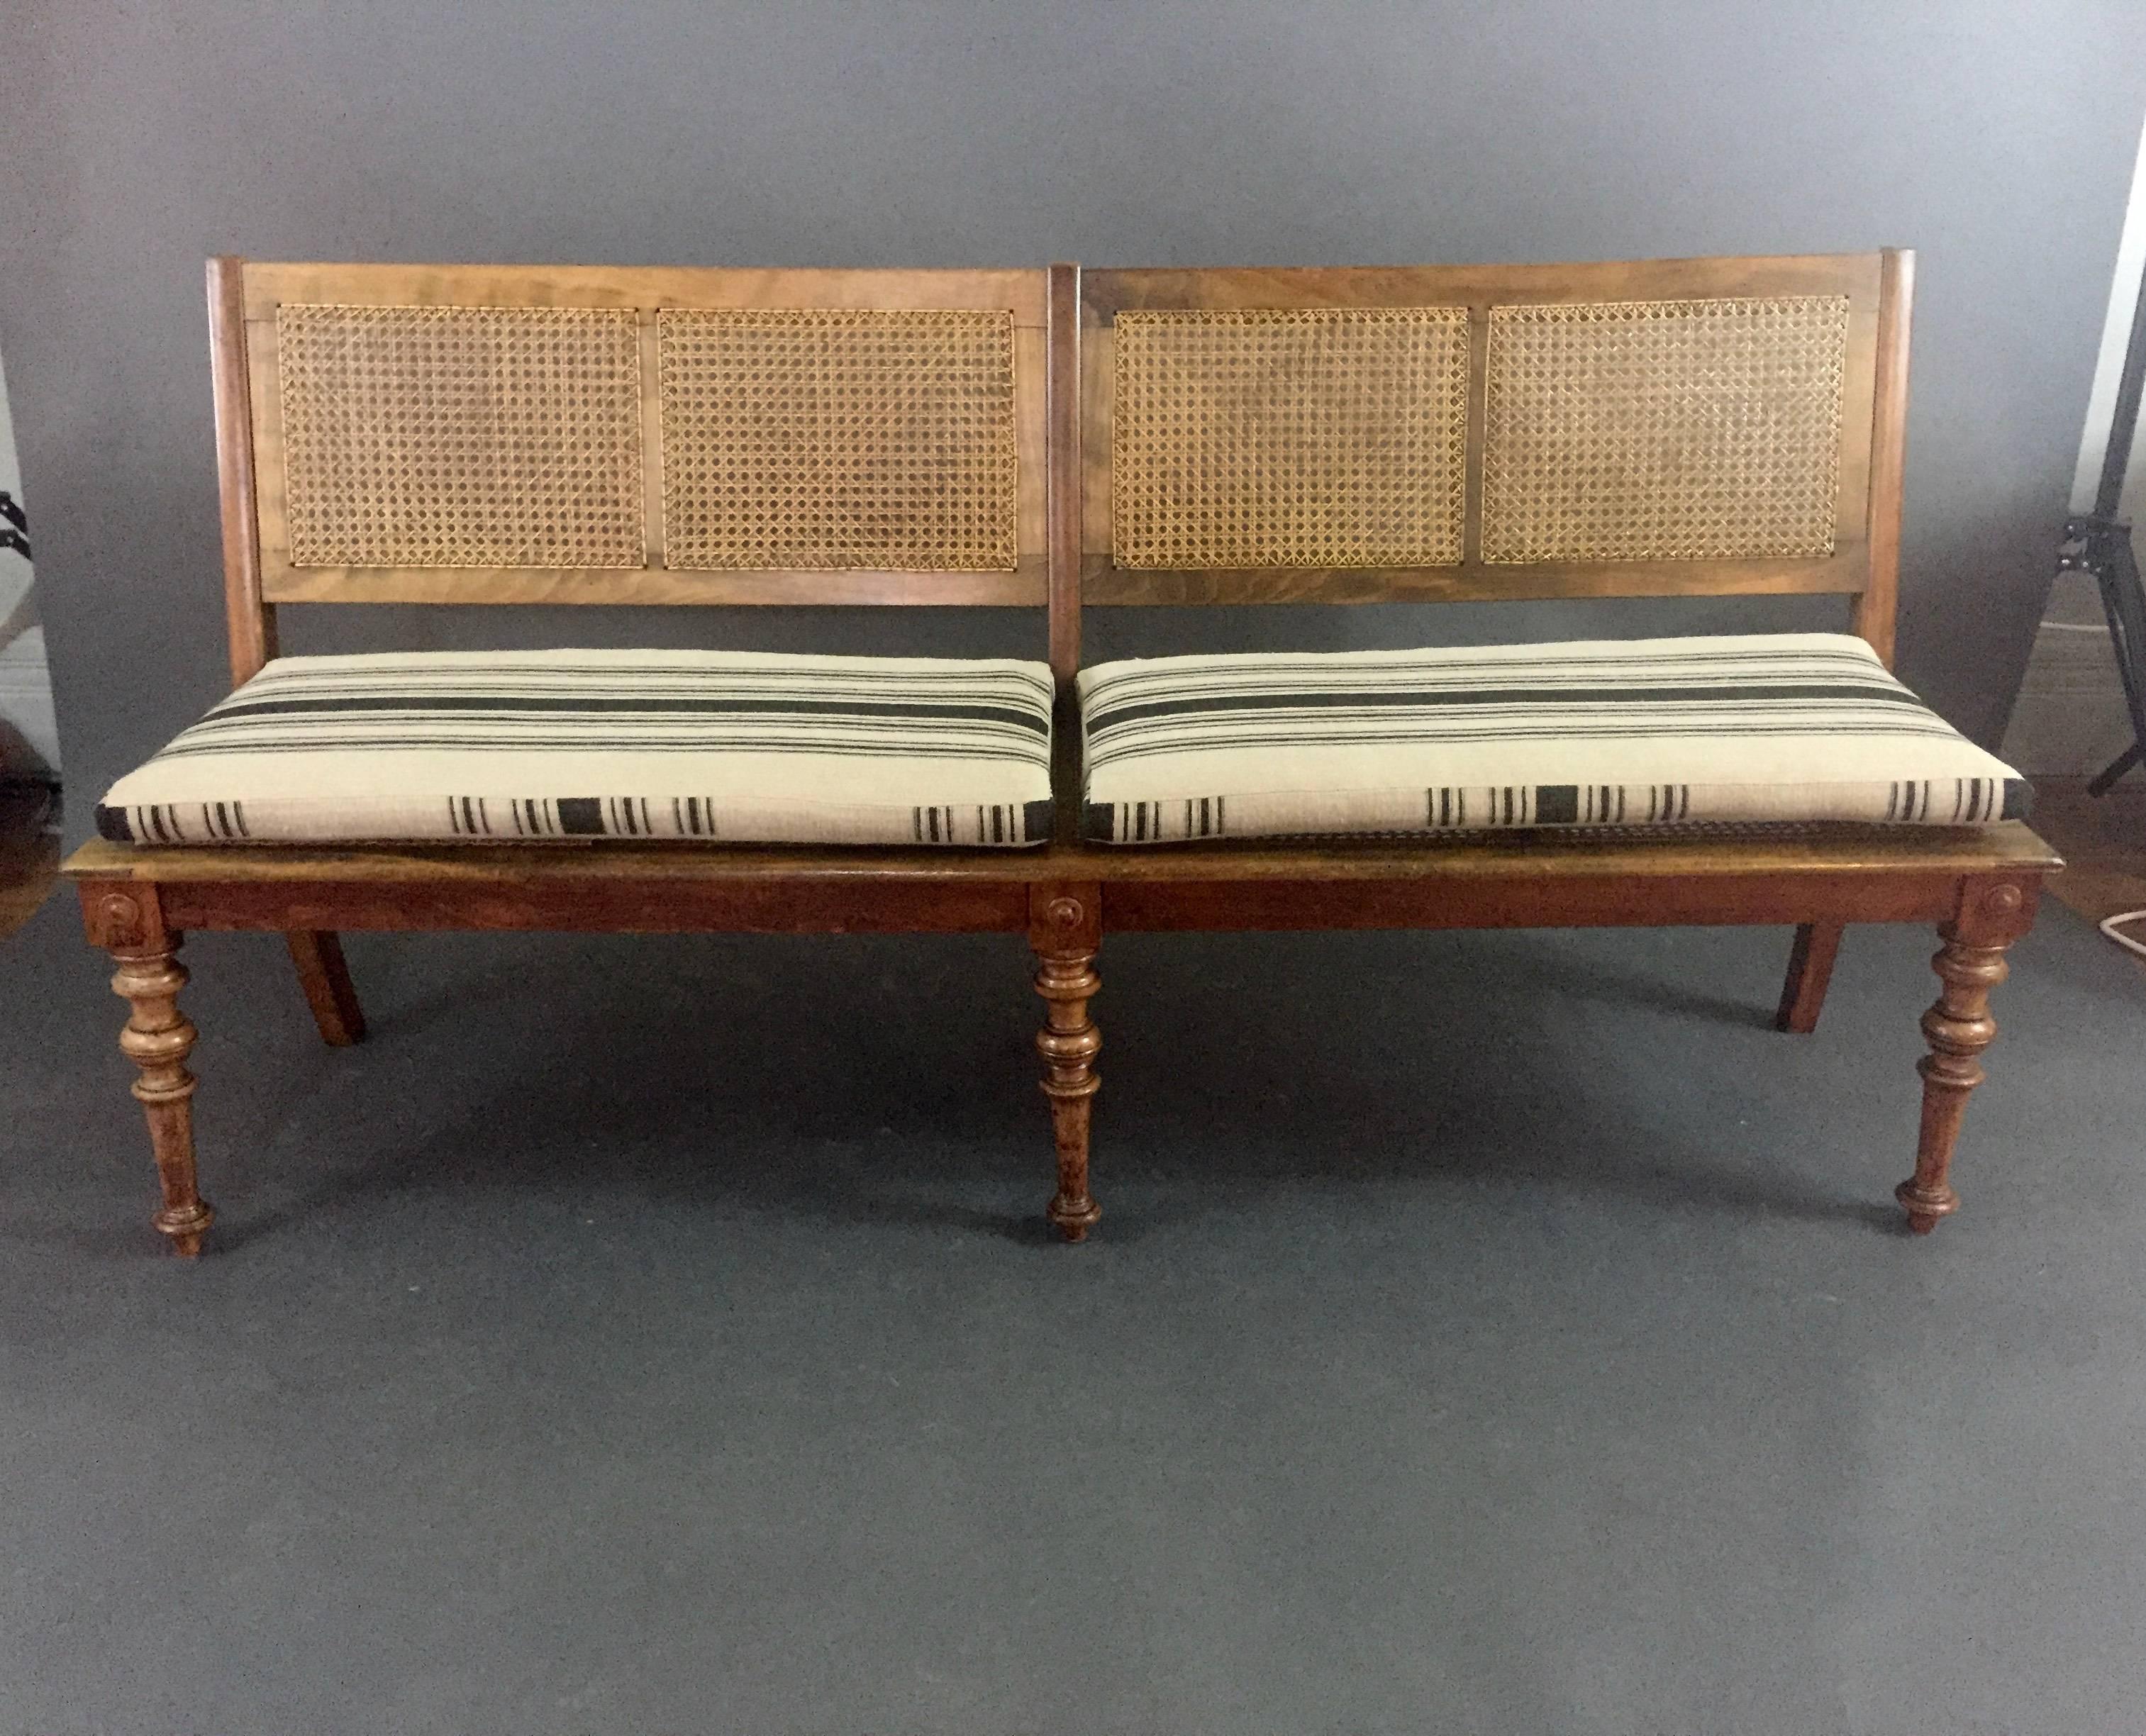 Purchased in Sweden, though likely of Continental production in the Art Nouveau period. This bench has a beechwood frame with carved leg detail and French caning to four sections of seat bottom and back Exceptionally long at 70.